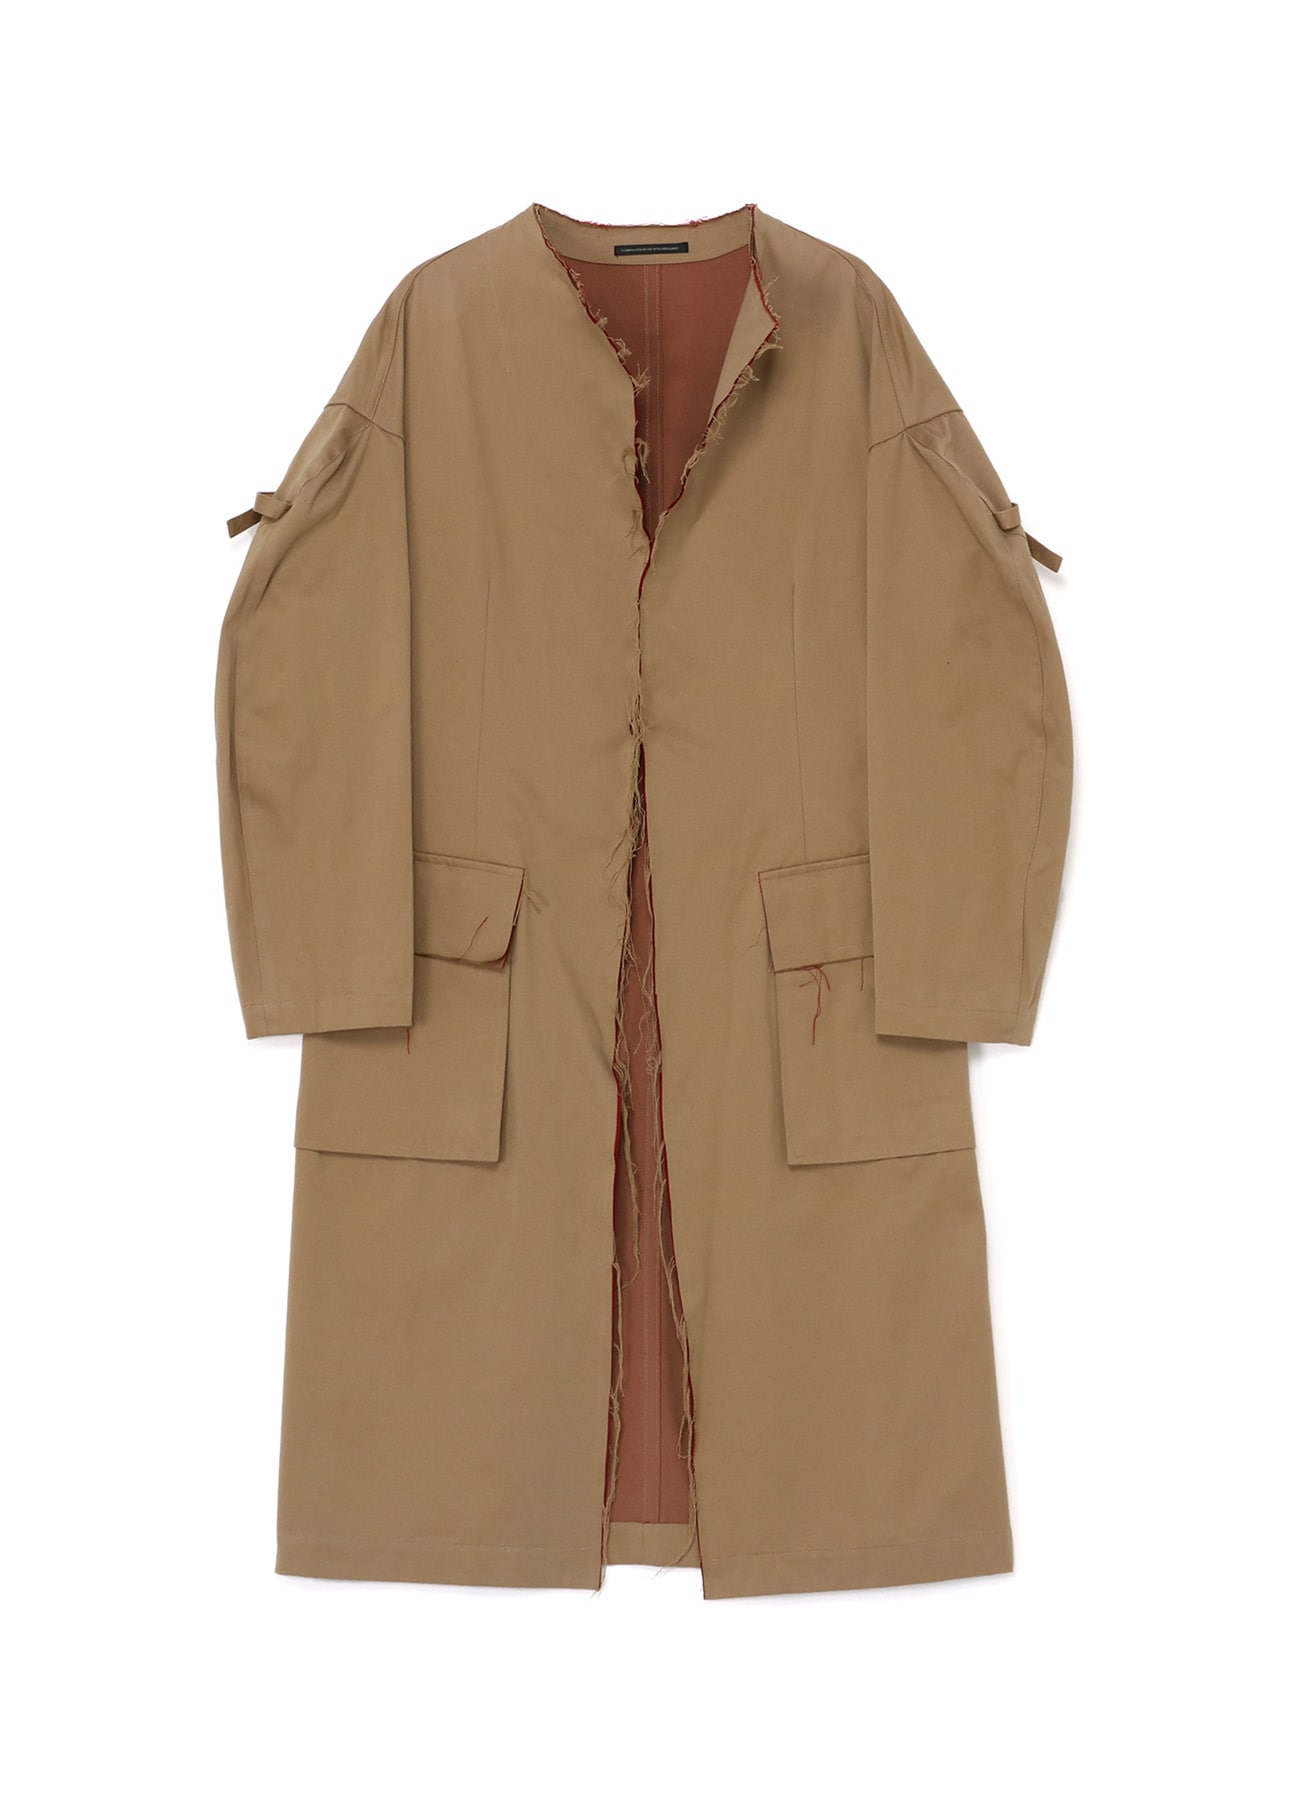 DOUBLE FACED TWILL NO COLLAR COAT(XS Beige): Vintage 1.1｜THE SHOP 